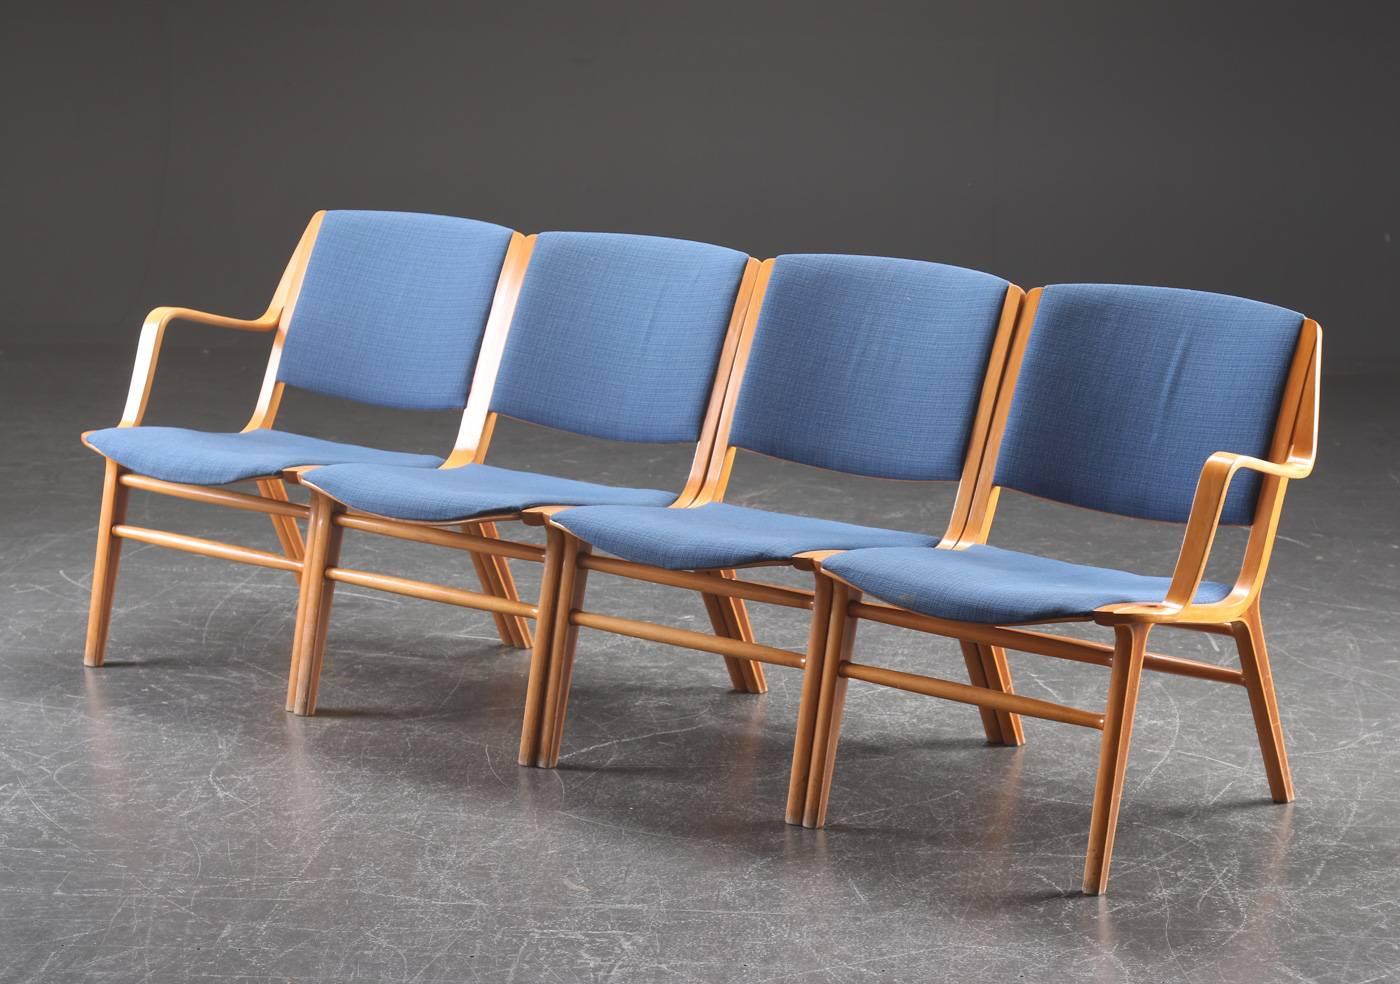 This lounge set was designed by Peter Hvidt & Orla Mølgaard-Nielsen for Fritz Hansen and is part of the AX series. It is made from beech and teak wood. The chairs are upholstered with a blue fabric. Measurements for the chairs: H 76cm x W 71cm x D